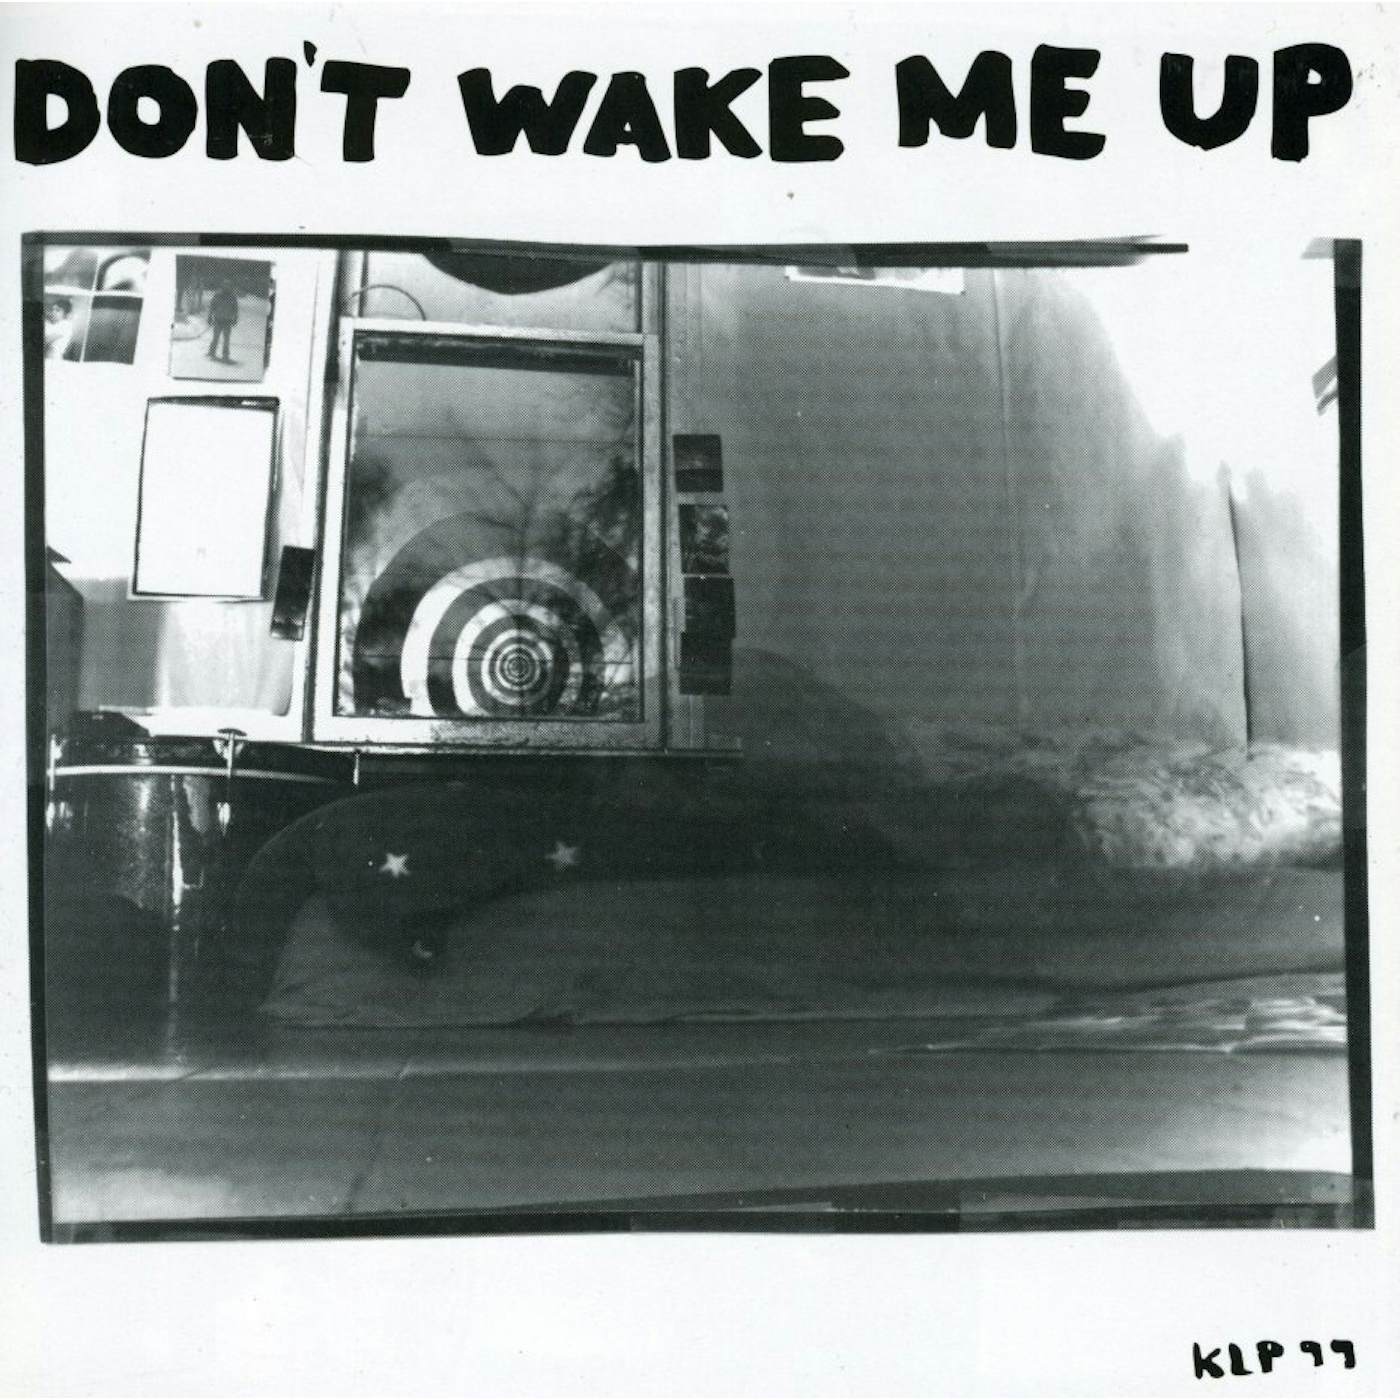 The Microphones DON'T WAKE ME UP CD